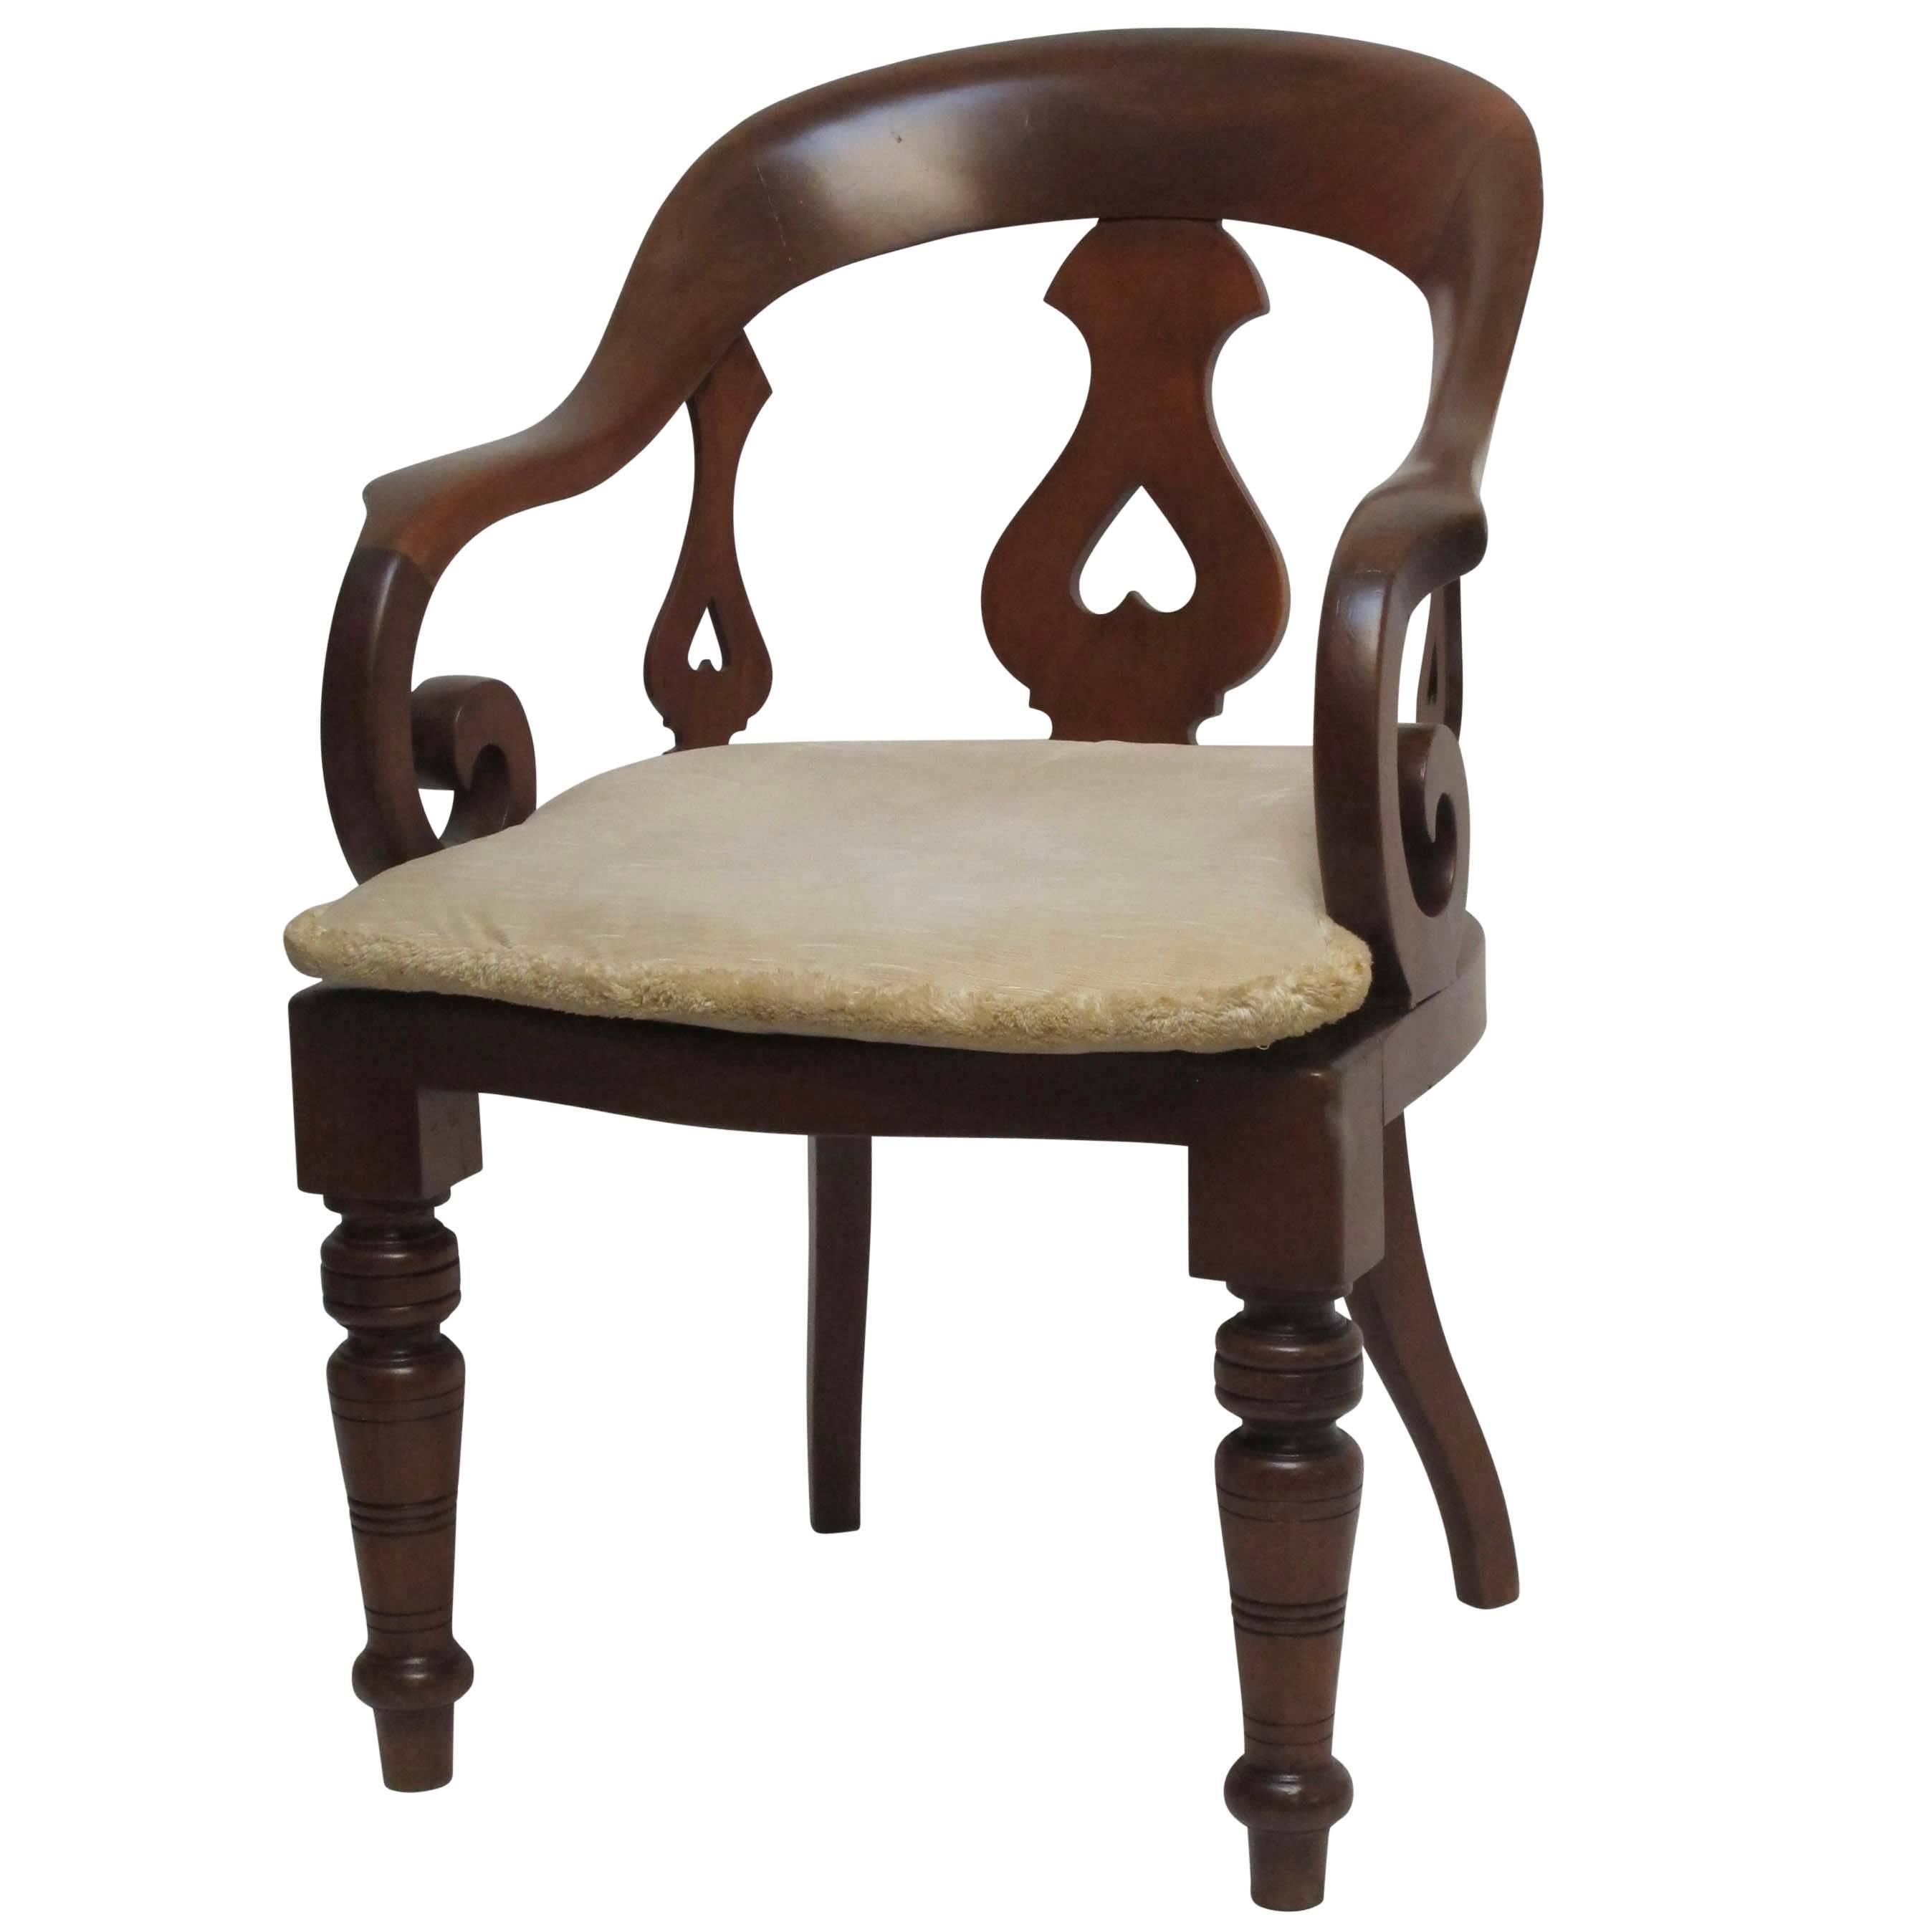 Mahogany barber's or dentist's chair with single back splat and two smaller side splats with heart shape cut-outs and hand woven cane seat. The sturdy scrolling arms curving around, having turned front legs and saber rear legs, England, circa